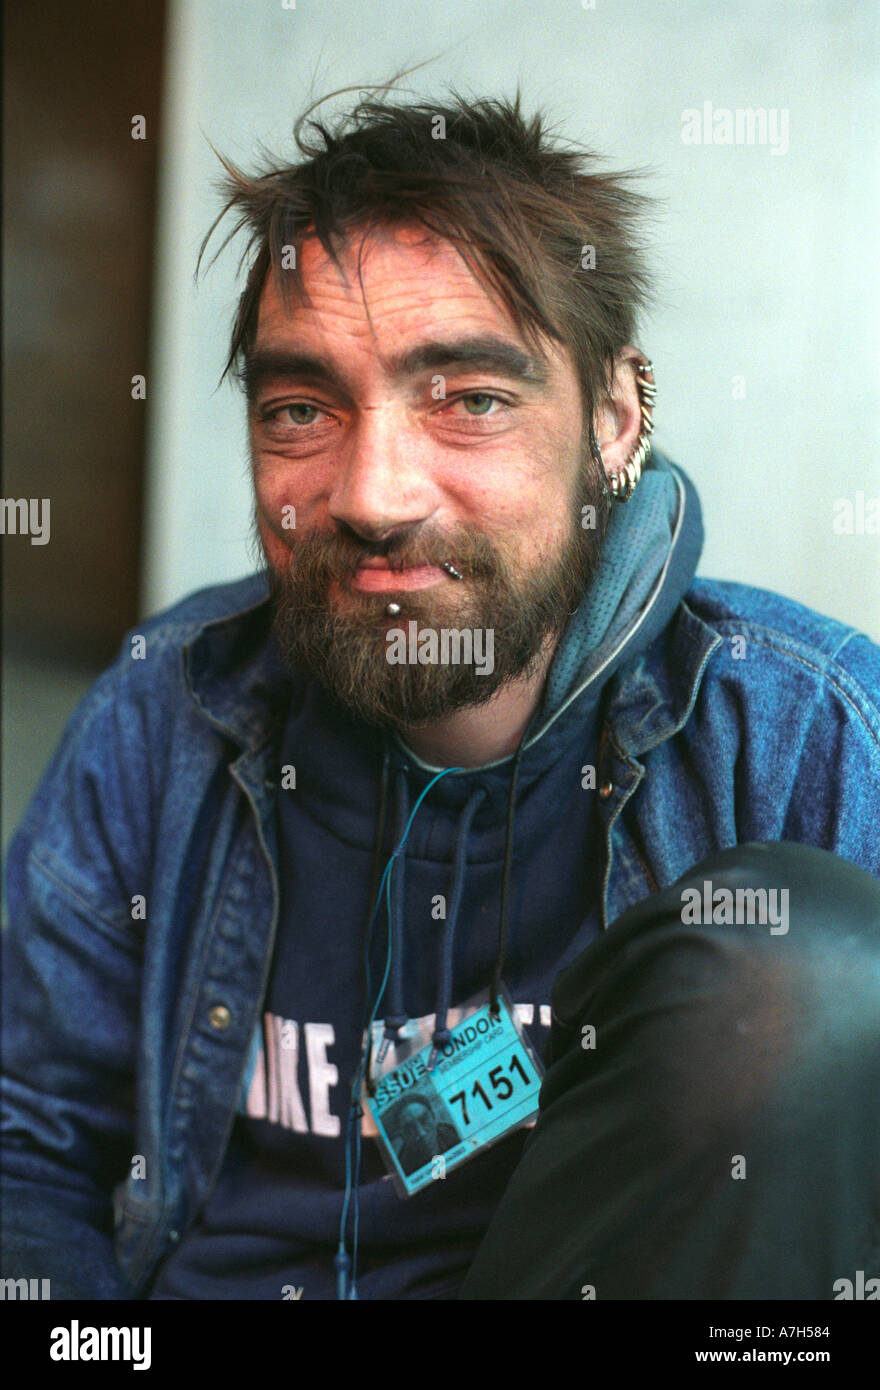 Homeless big issue seller on streets of London. Stock Photo